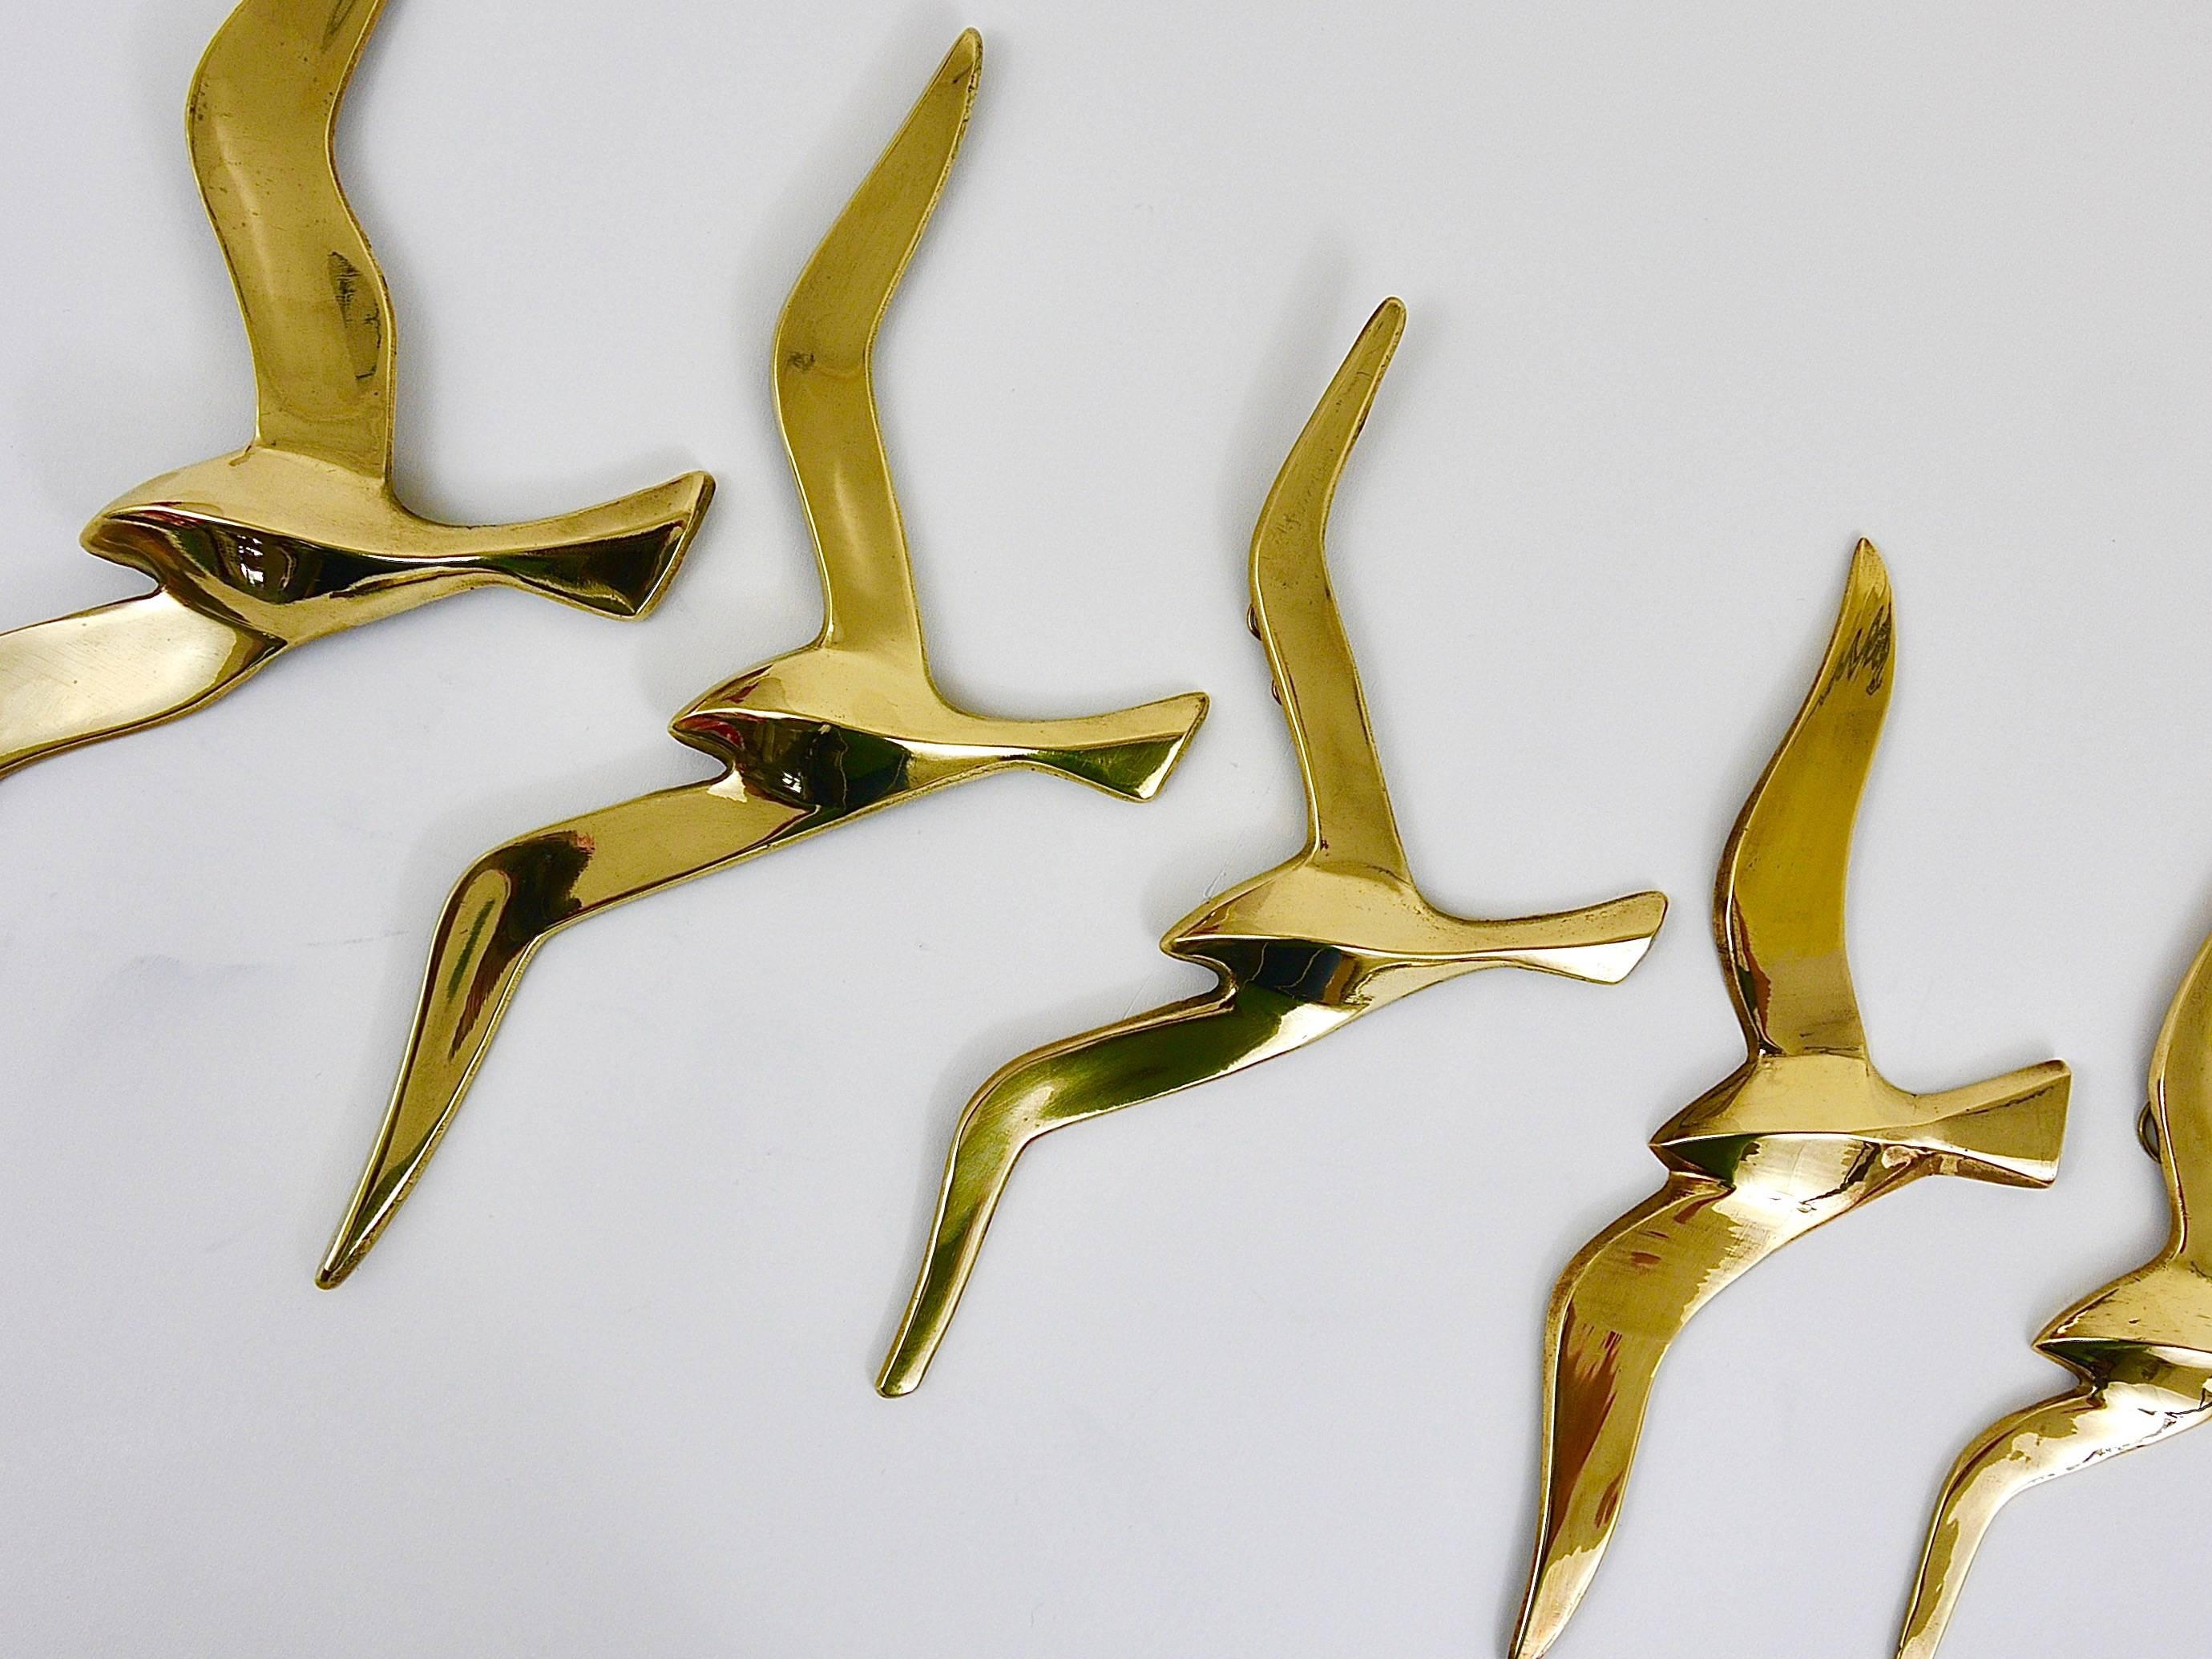 A set of five lovely wall-mounted modernist birds / gulls. Handmade of brass in the 1950s in Austria. Gently polished, in excellent condition. Width of the birds: 14 to 8 inches.